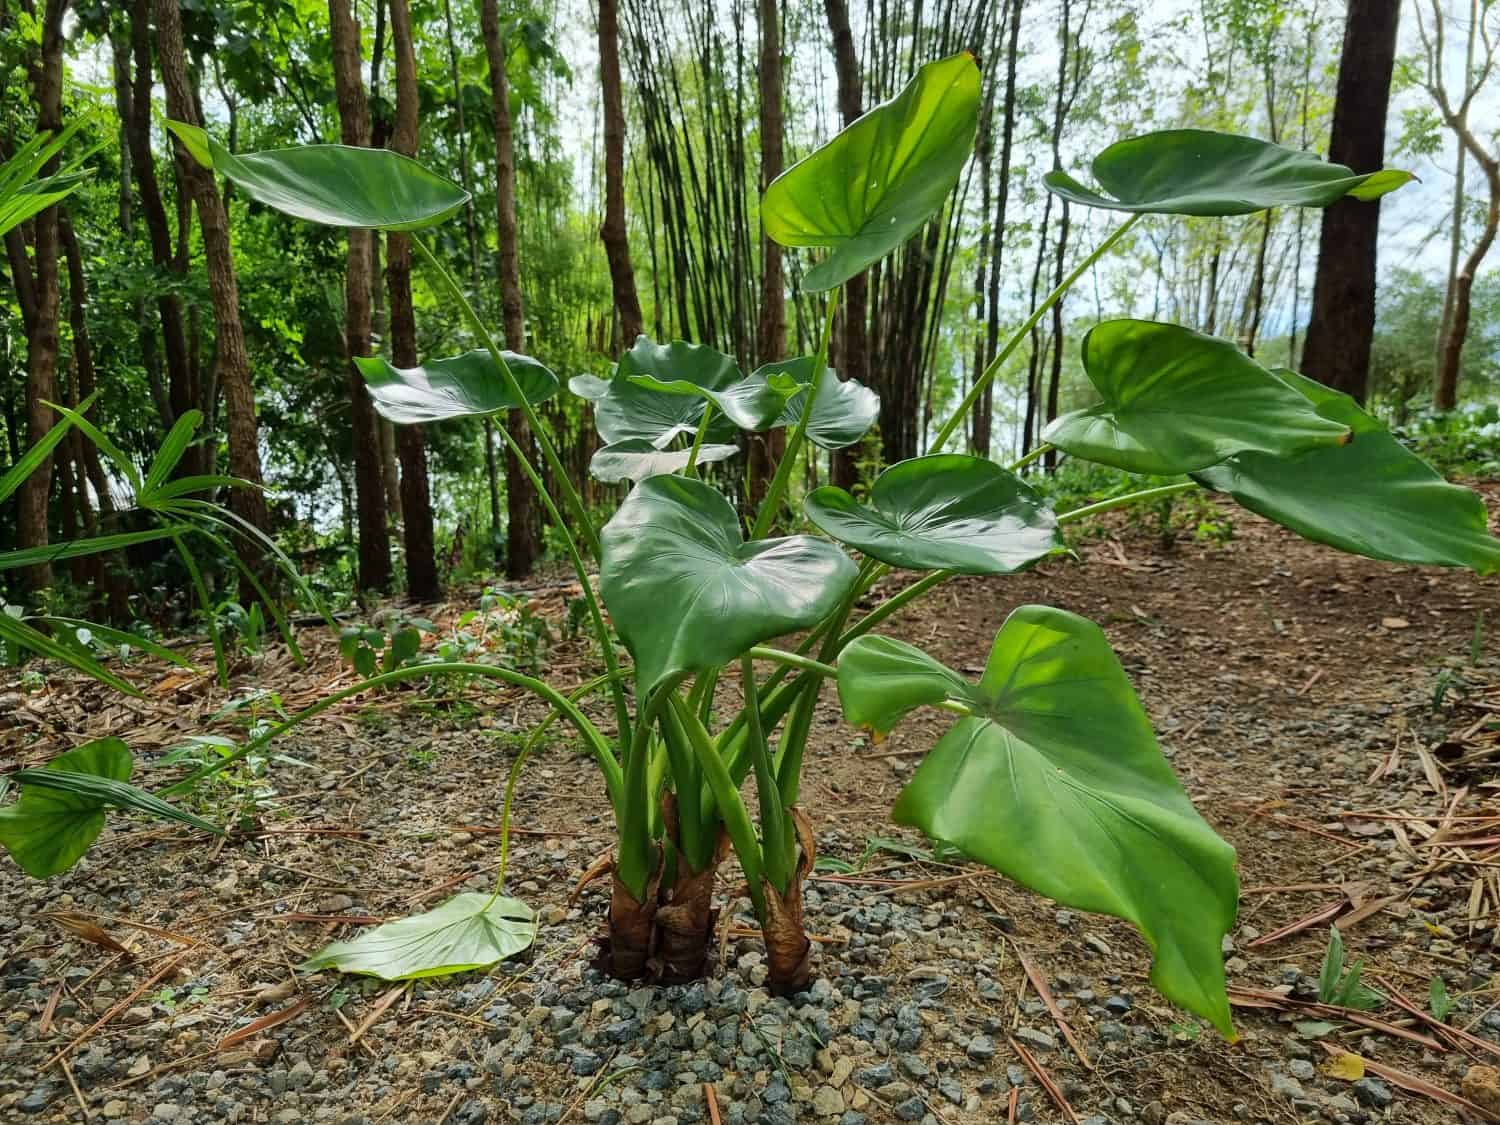 philodendron rugosum grow well on the ground in forests